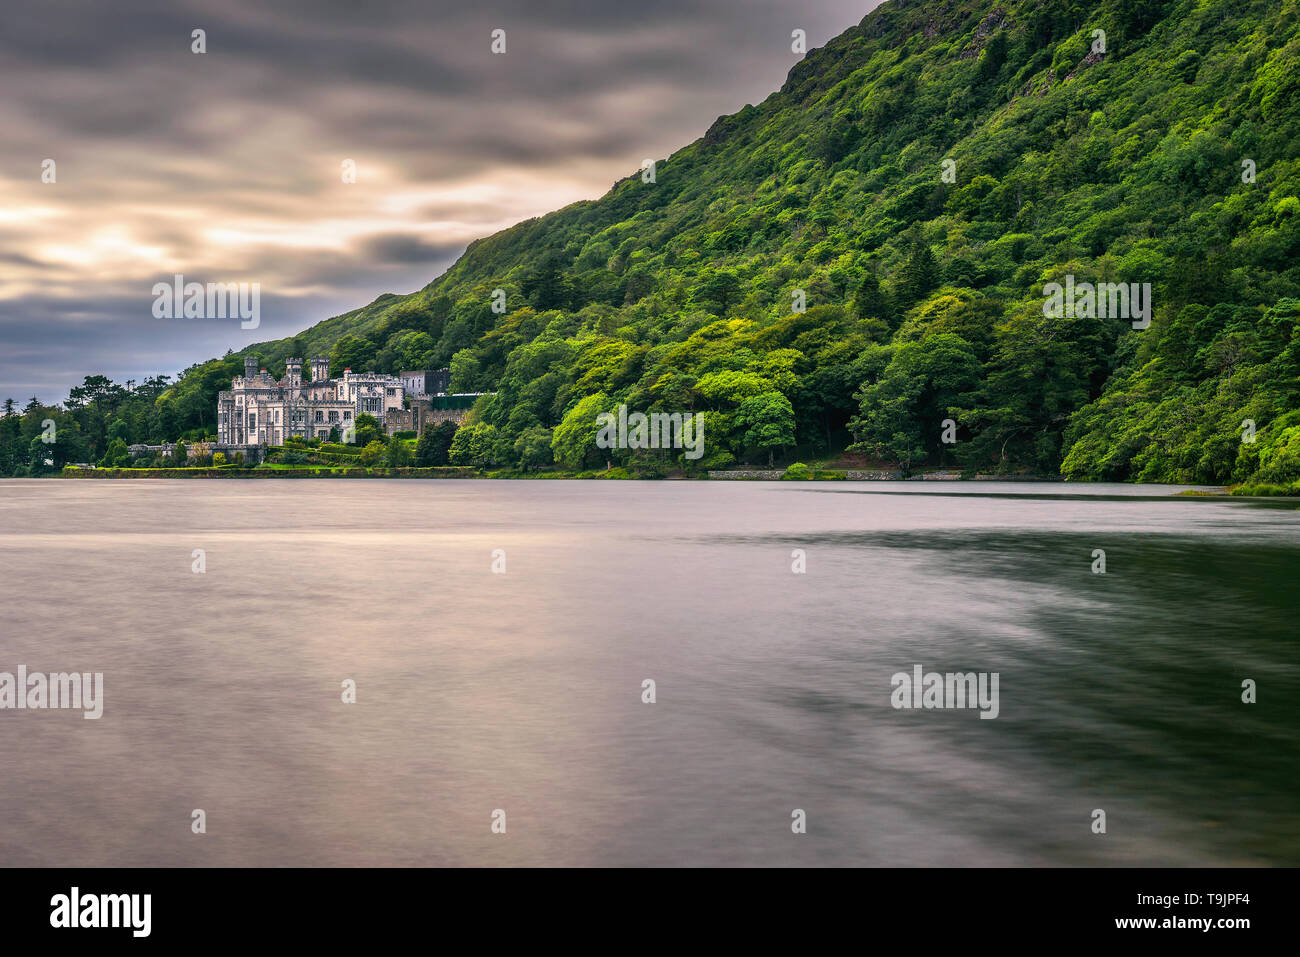 Kylemore Abbey in Ireland and the Pollacapall Lough Stock Photo